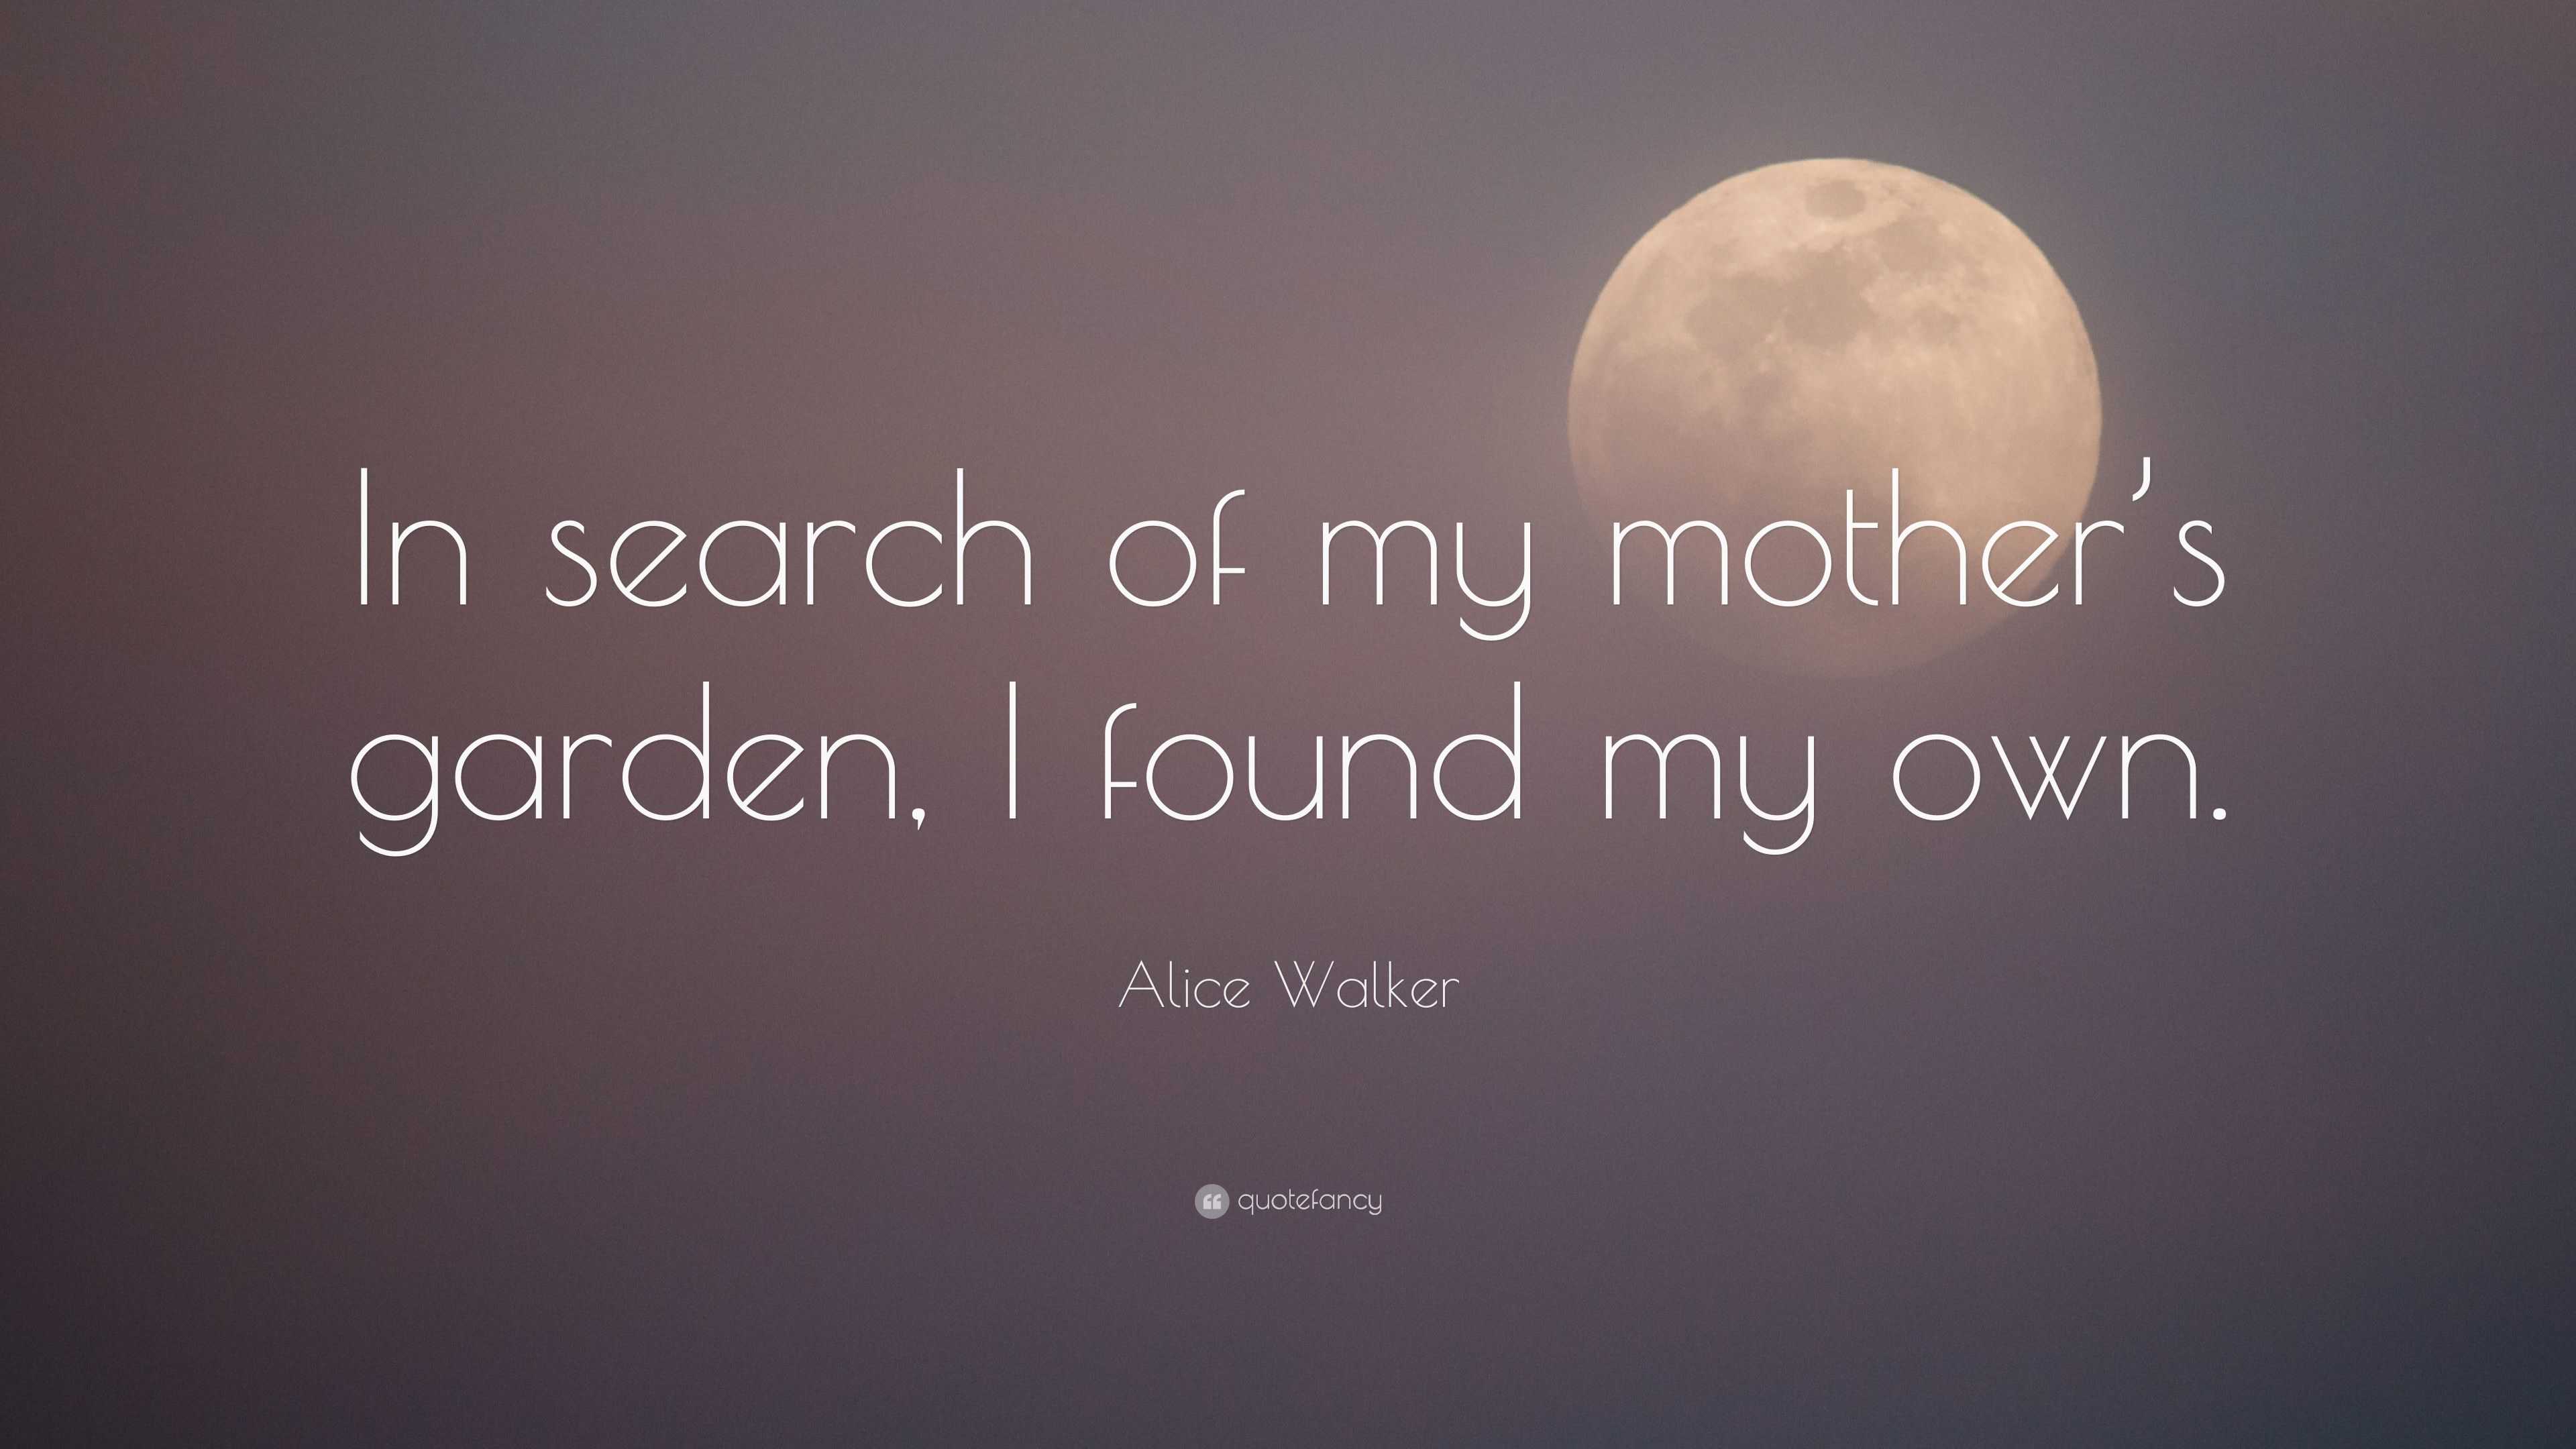 Alice Walker - In search of my mother's garden, I found my